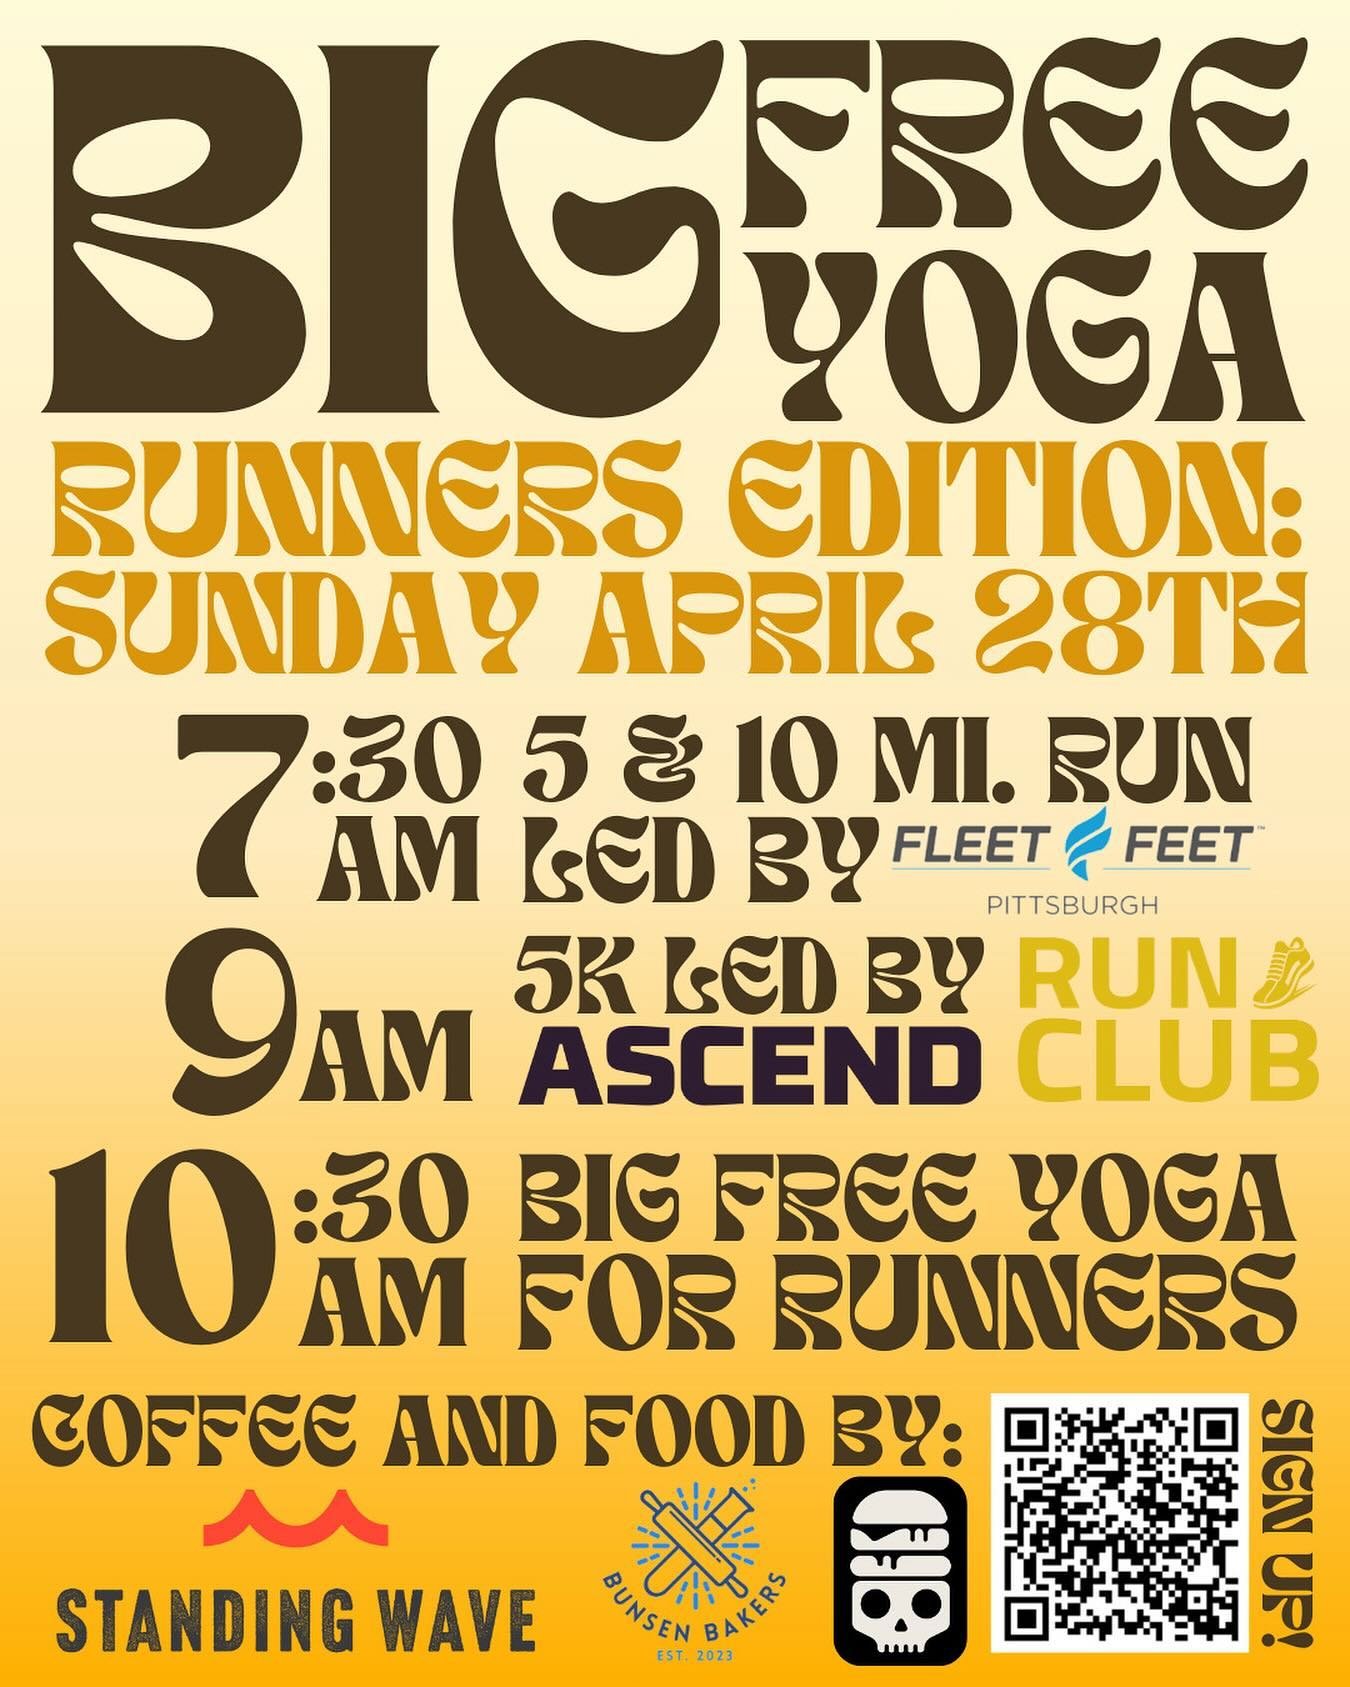 Treat yourself to some baked goodies after a run and some yoga! Spots are limited for @velumfermentation Big Free Yoga event next Sunday, sign up now🏃&zwj;♀️🧘🍪